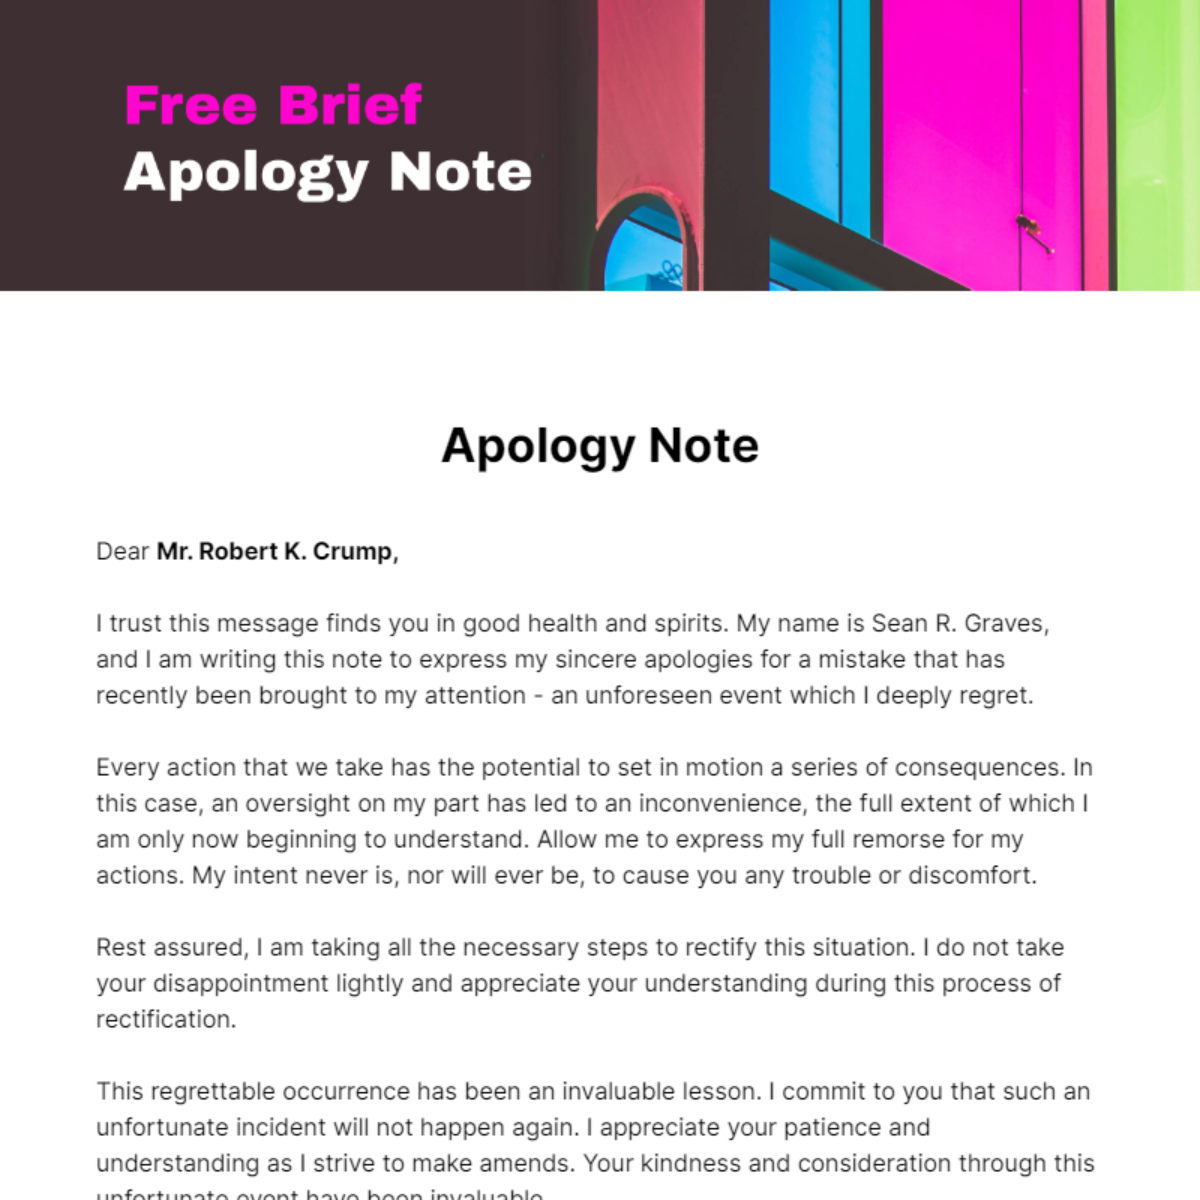 Free Brief Apology Note Template